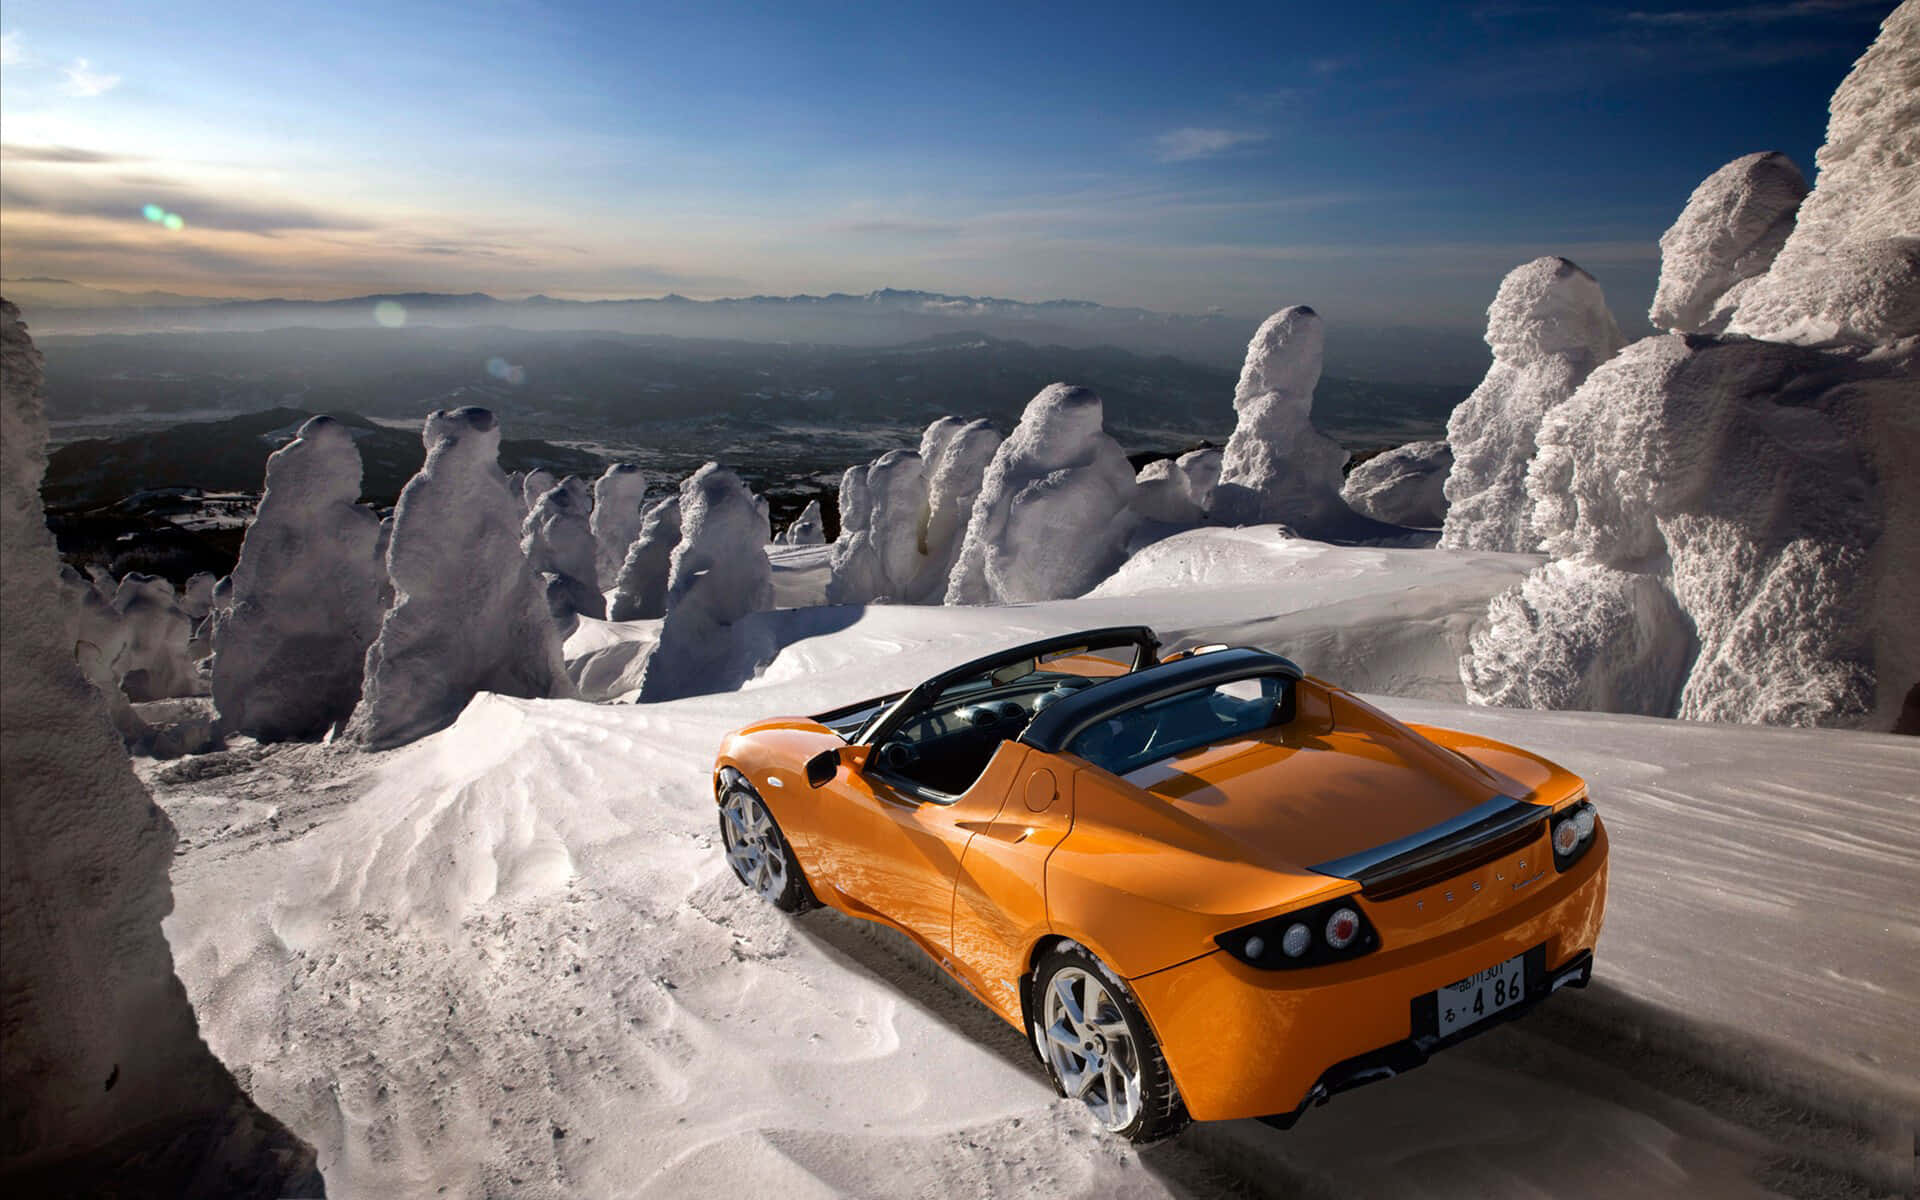 Caption: Sleek And Sophisticated Tesla Roadster Parked In A Glowing Spotlight Background